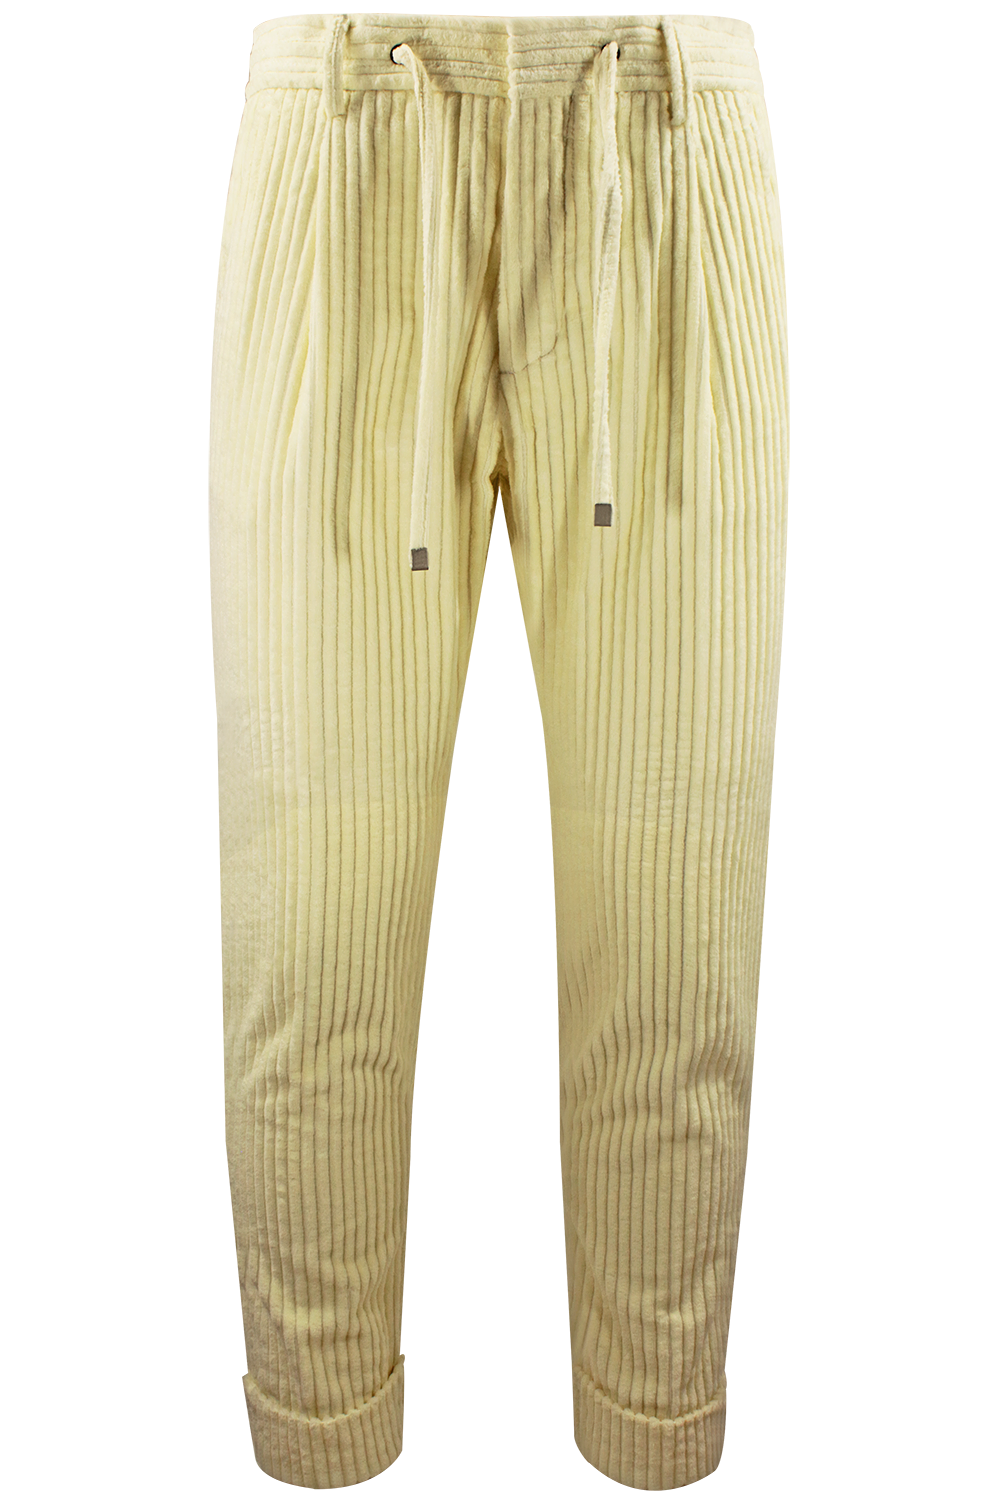 Pantalone con pince e coulisse in velluto a coste panna